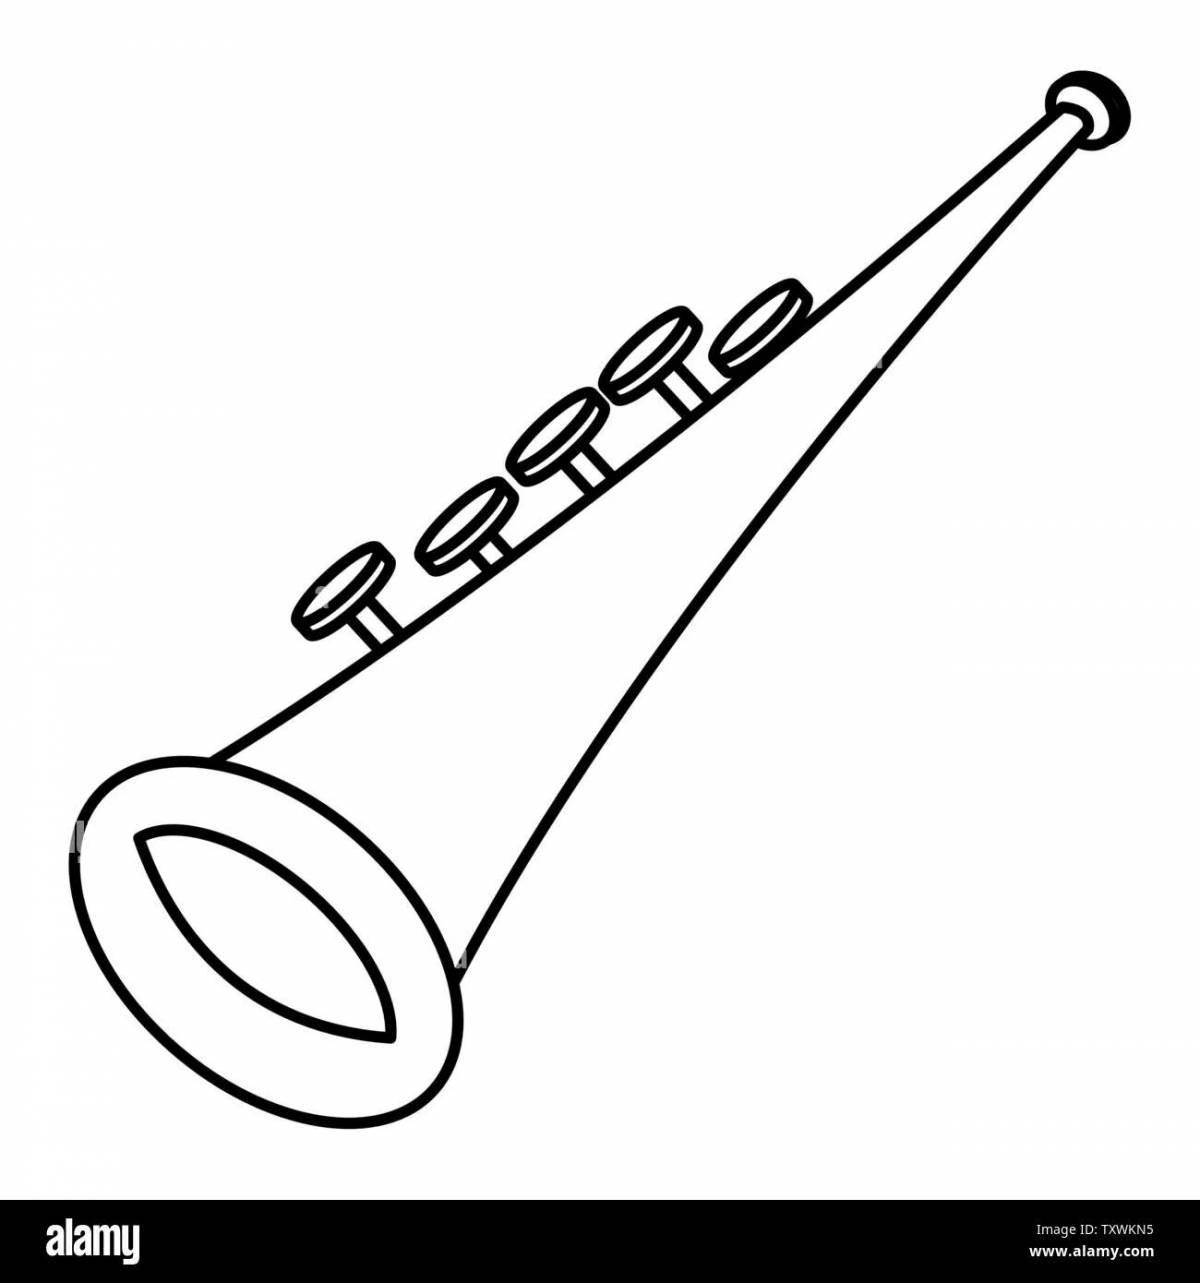 Colorful musical instrument coloring book